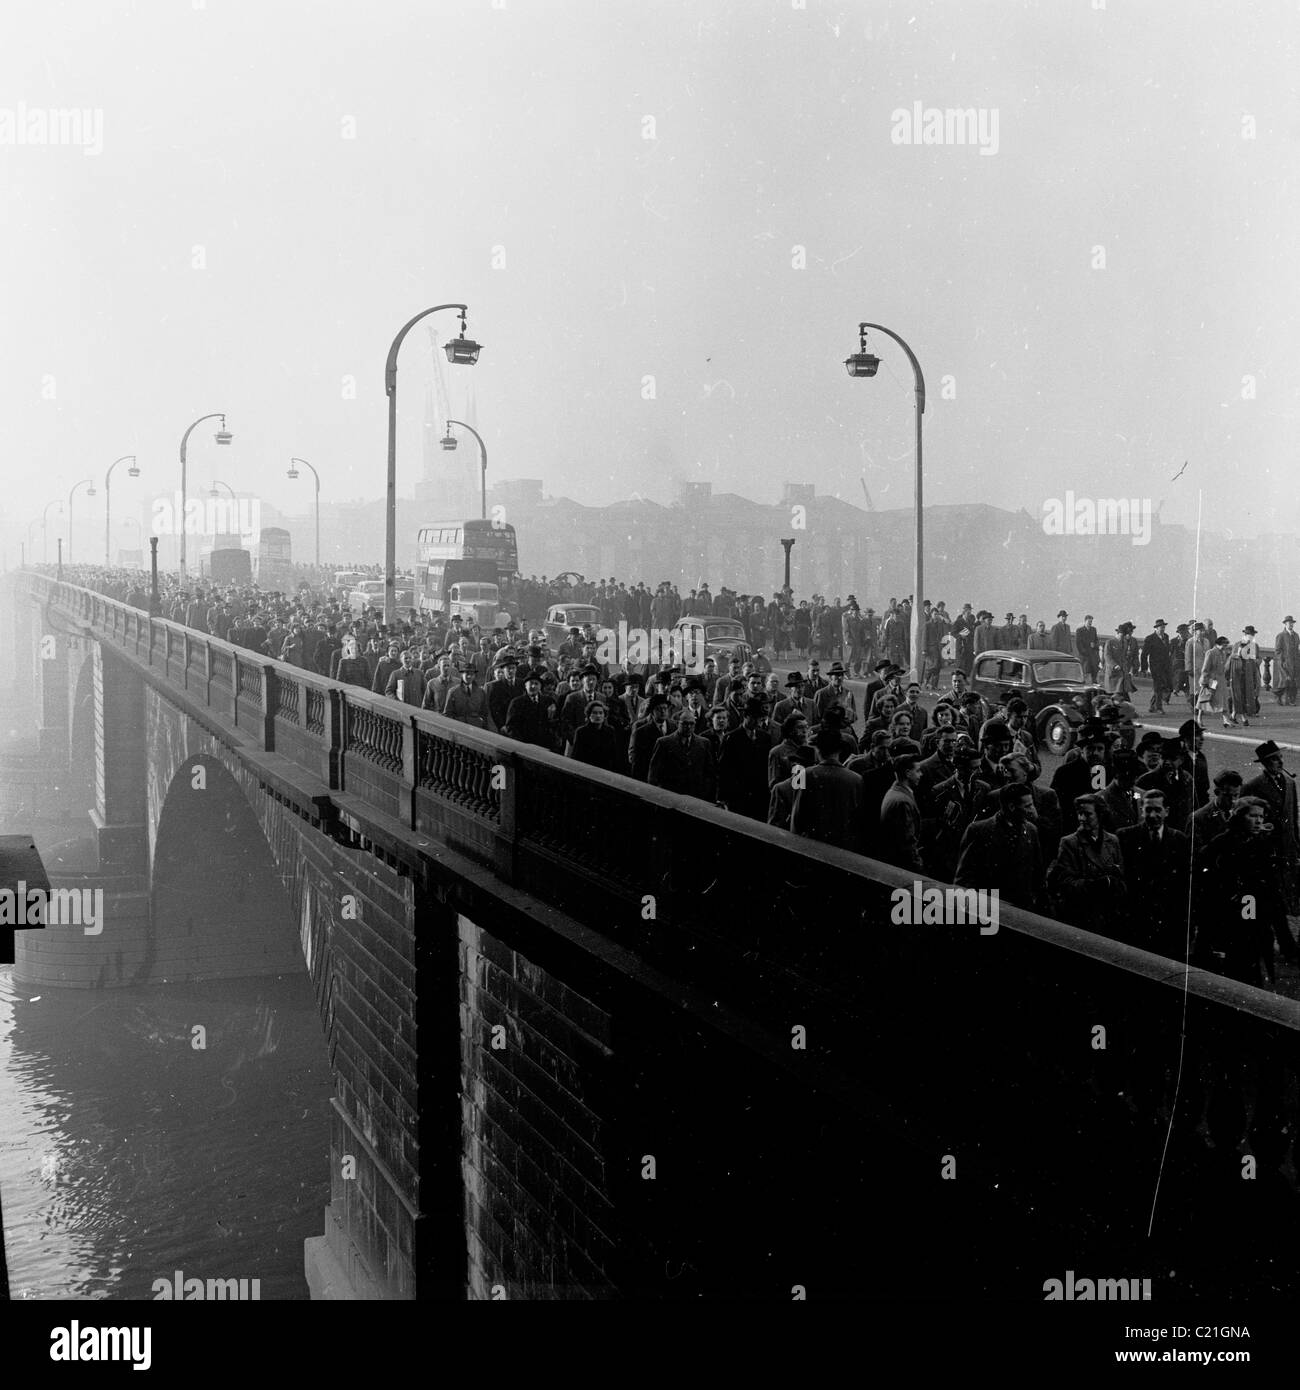 1950s. A smoggy London as large crowds of people walk across Waterloo Bridge,  on their way to work in this historical picture. Stock Photo